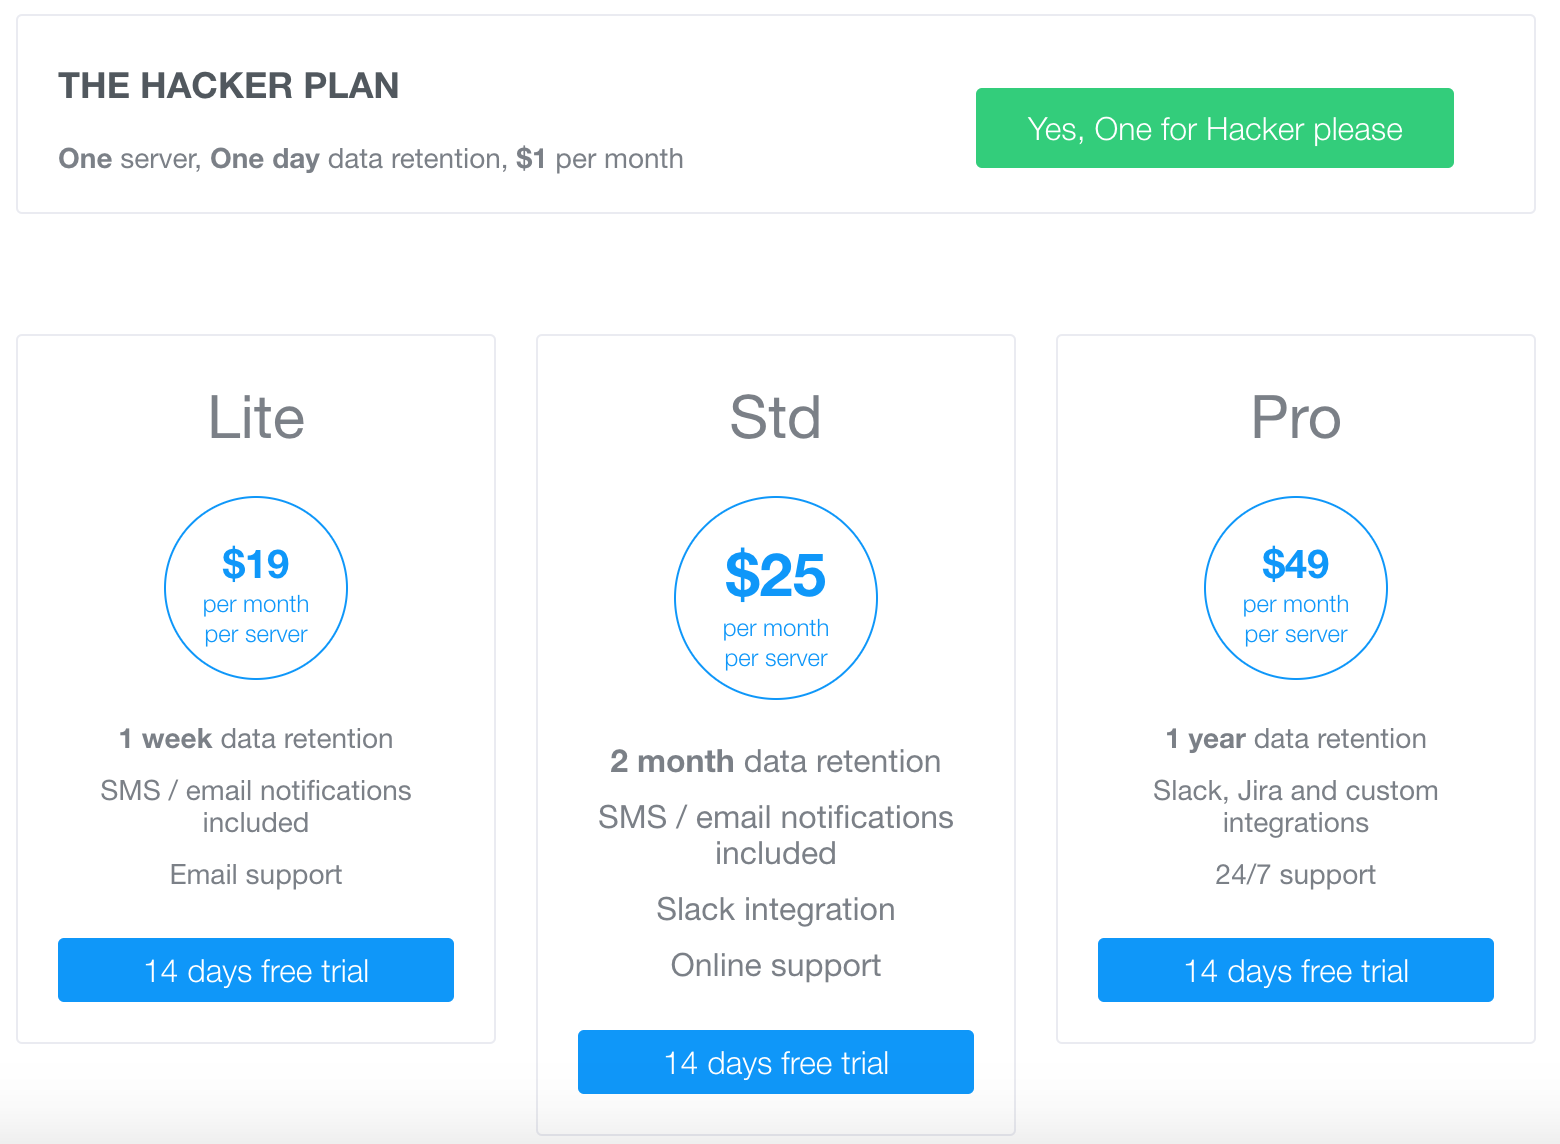 Plans range from $1 to $49+ per month.